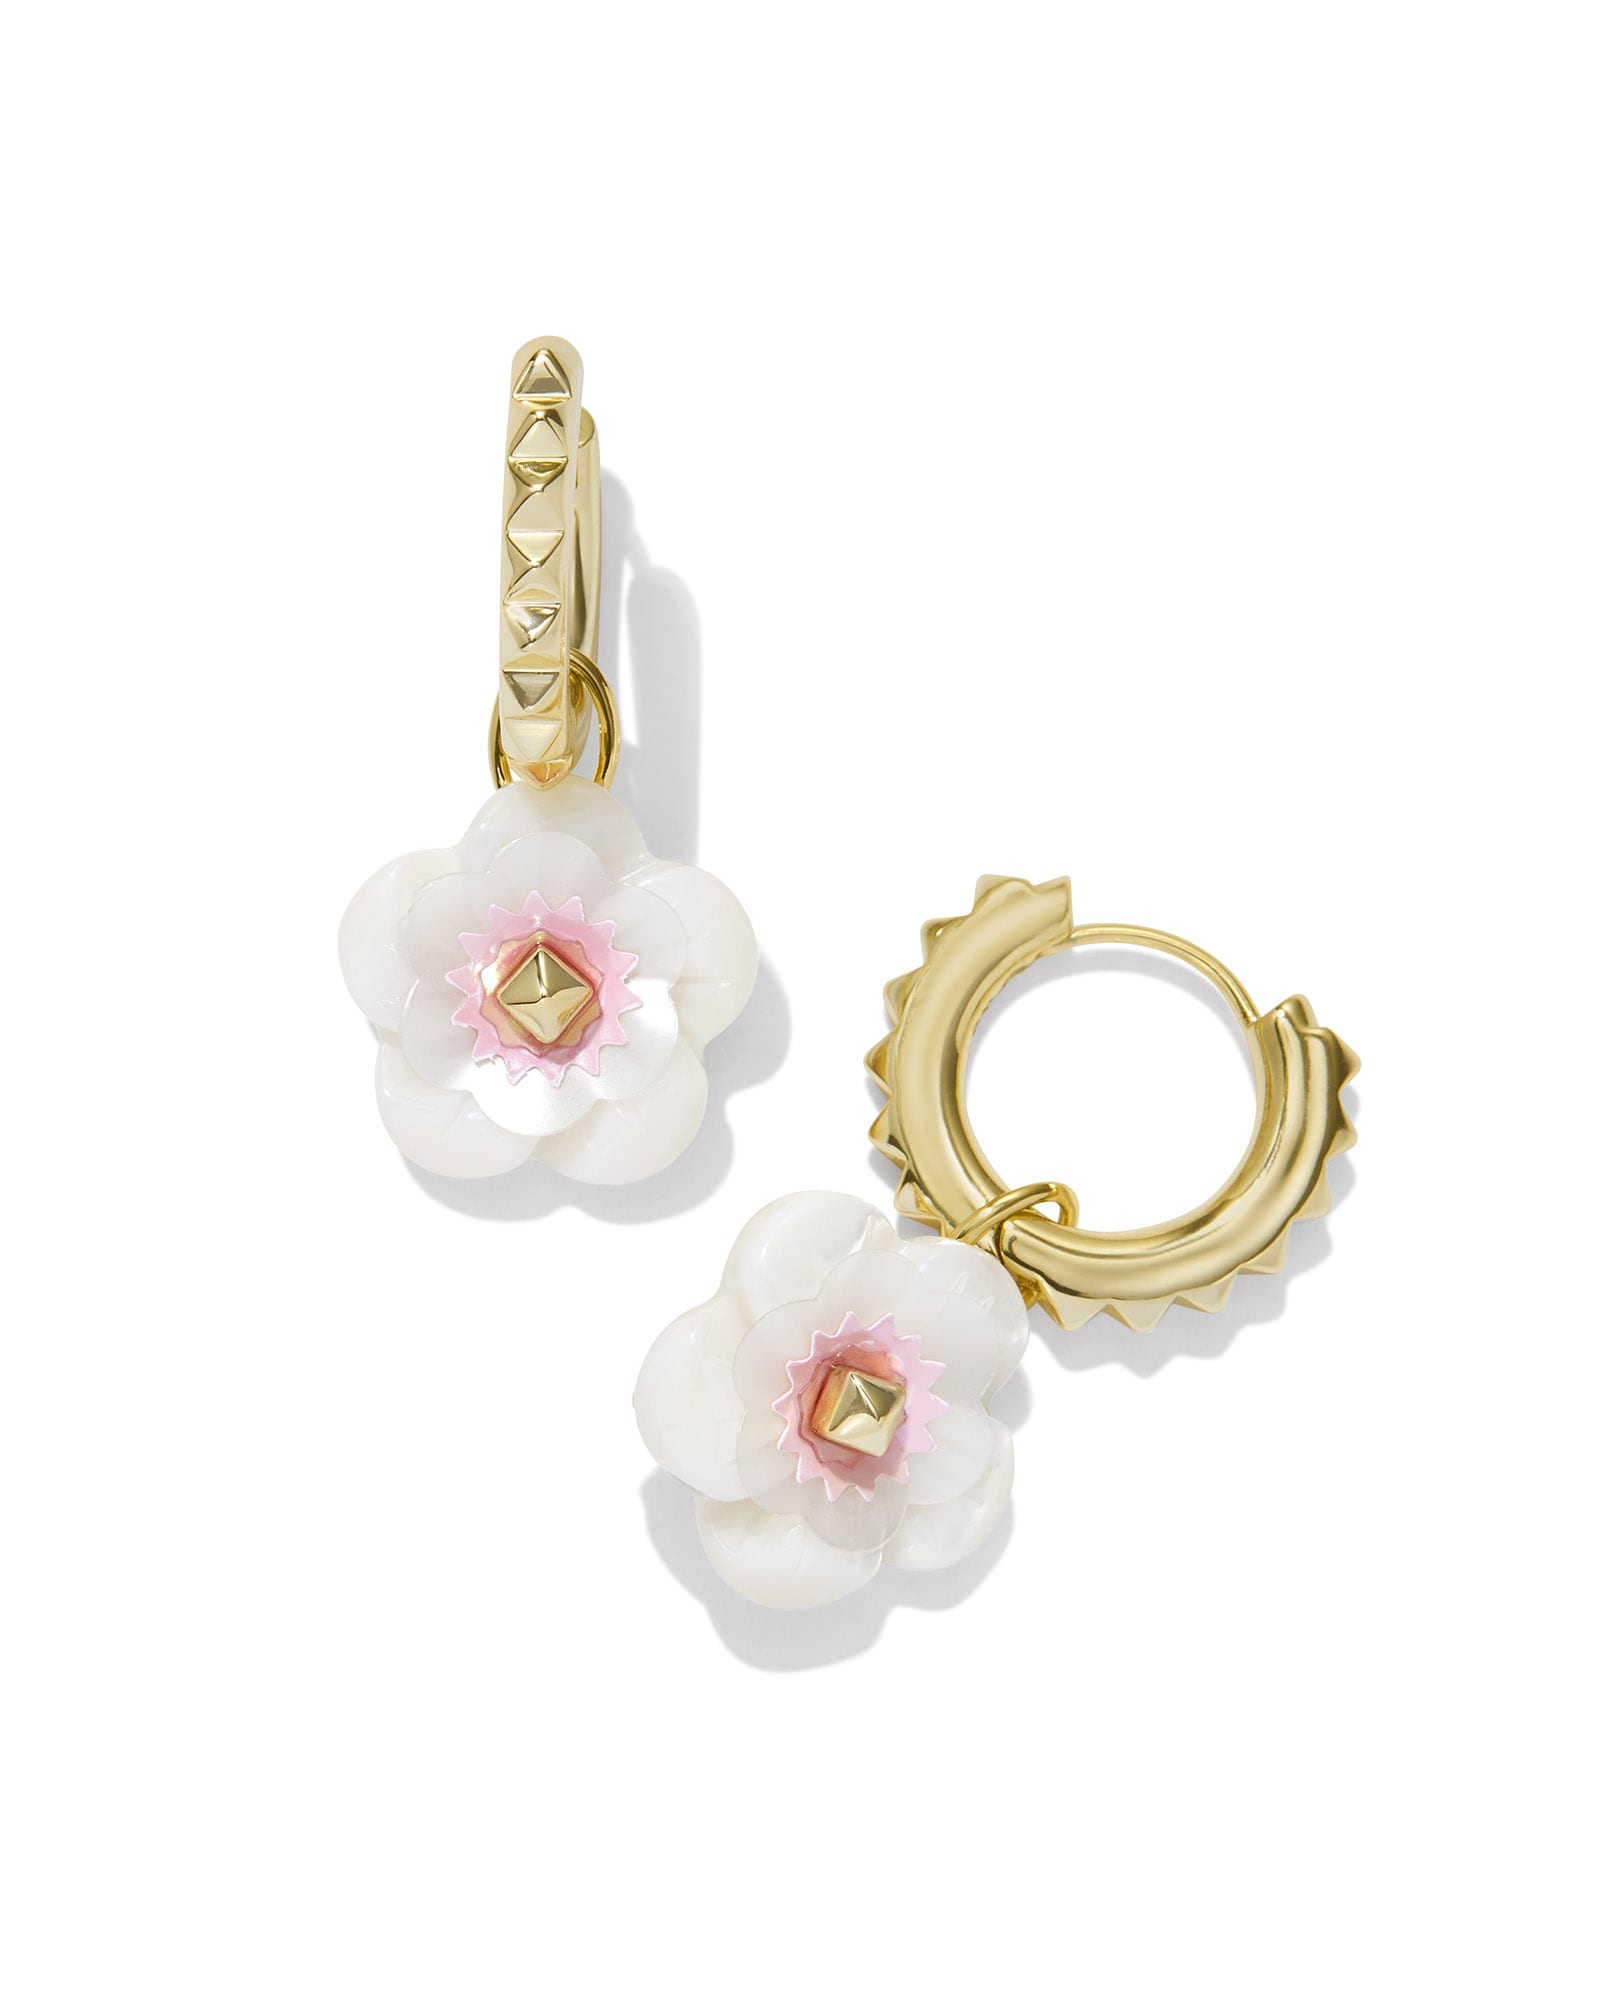 Deliah Convertible Gold Huggie Earrings in Iridescent Pink White Mix | Kendra Scott